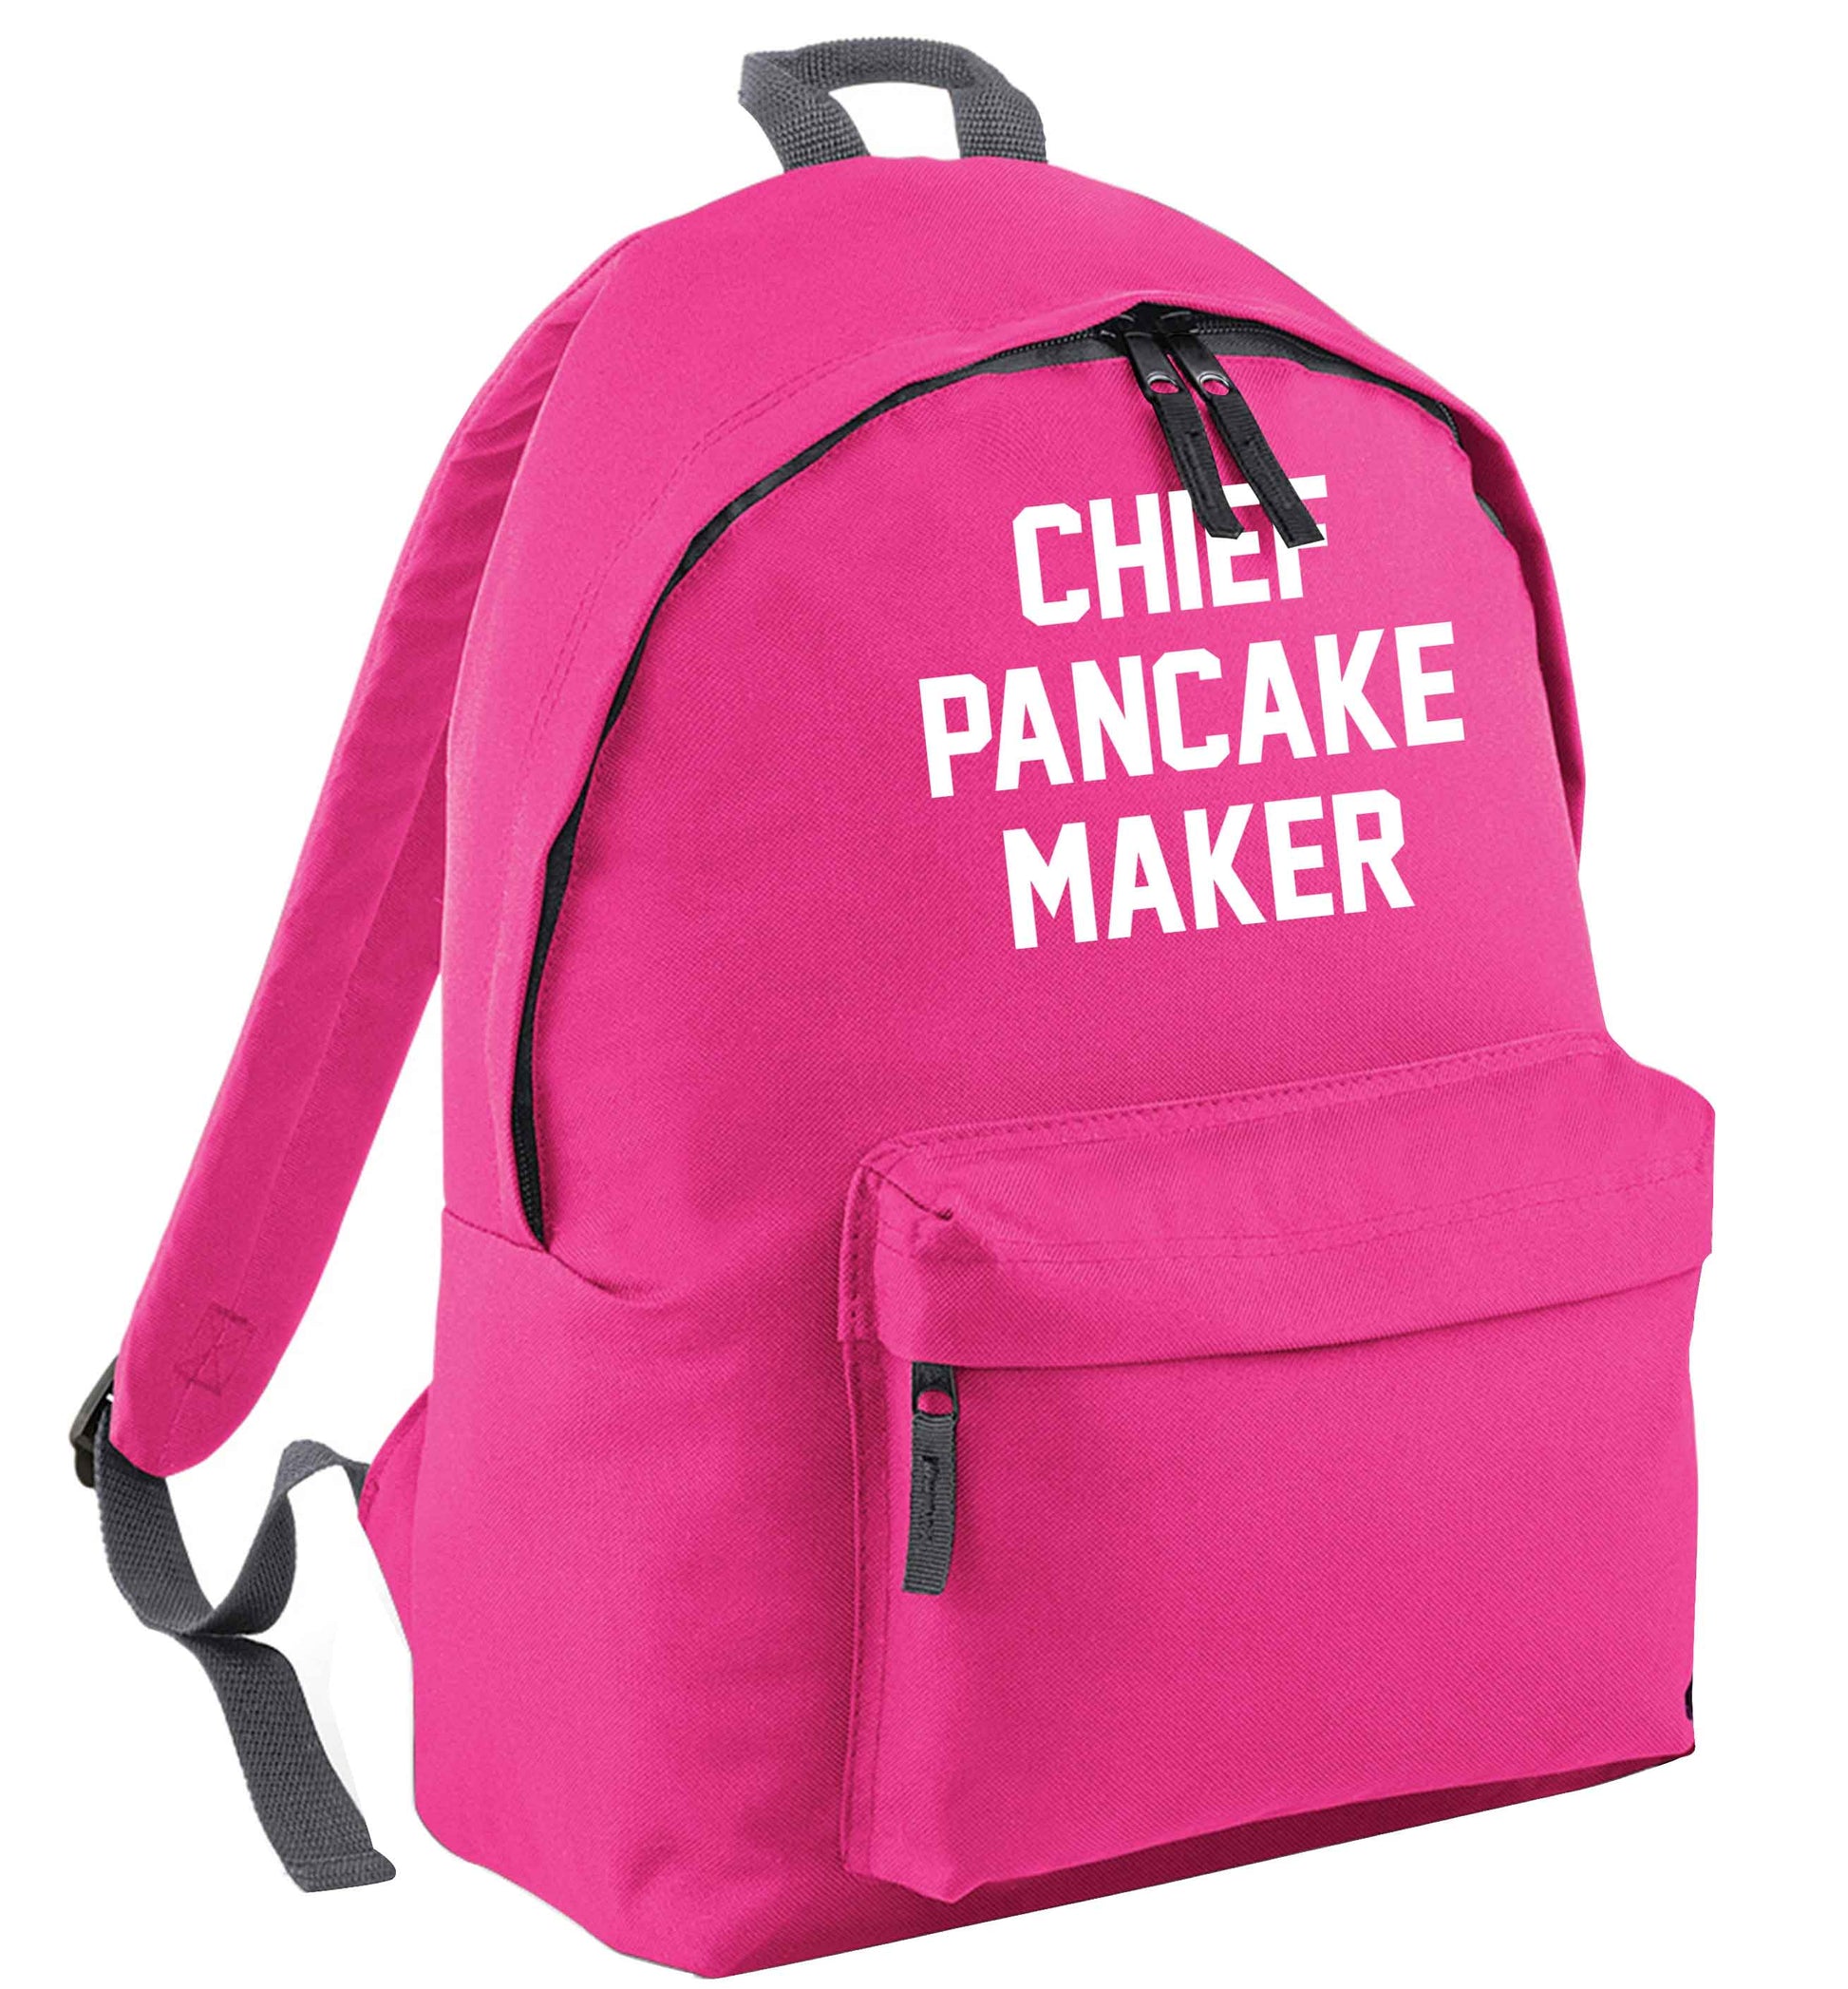 Chief pancake maker pink adults backpack